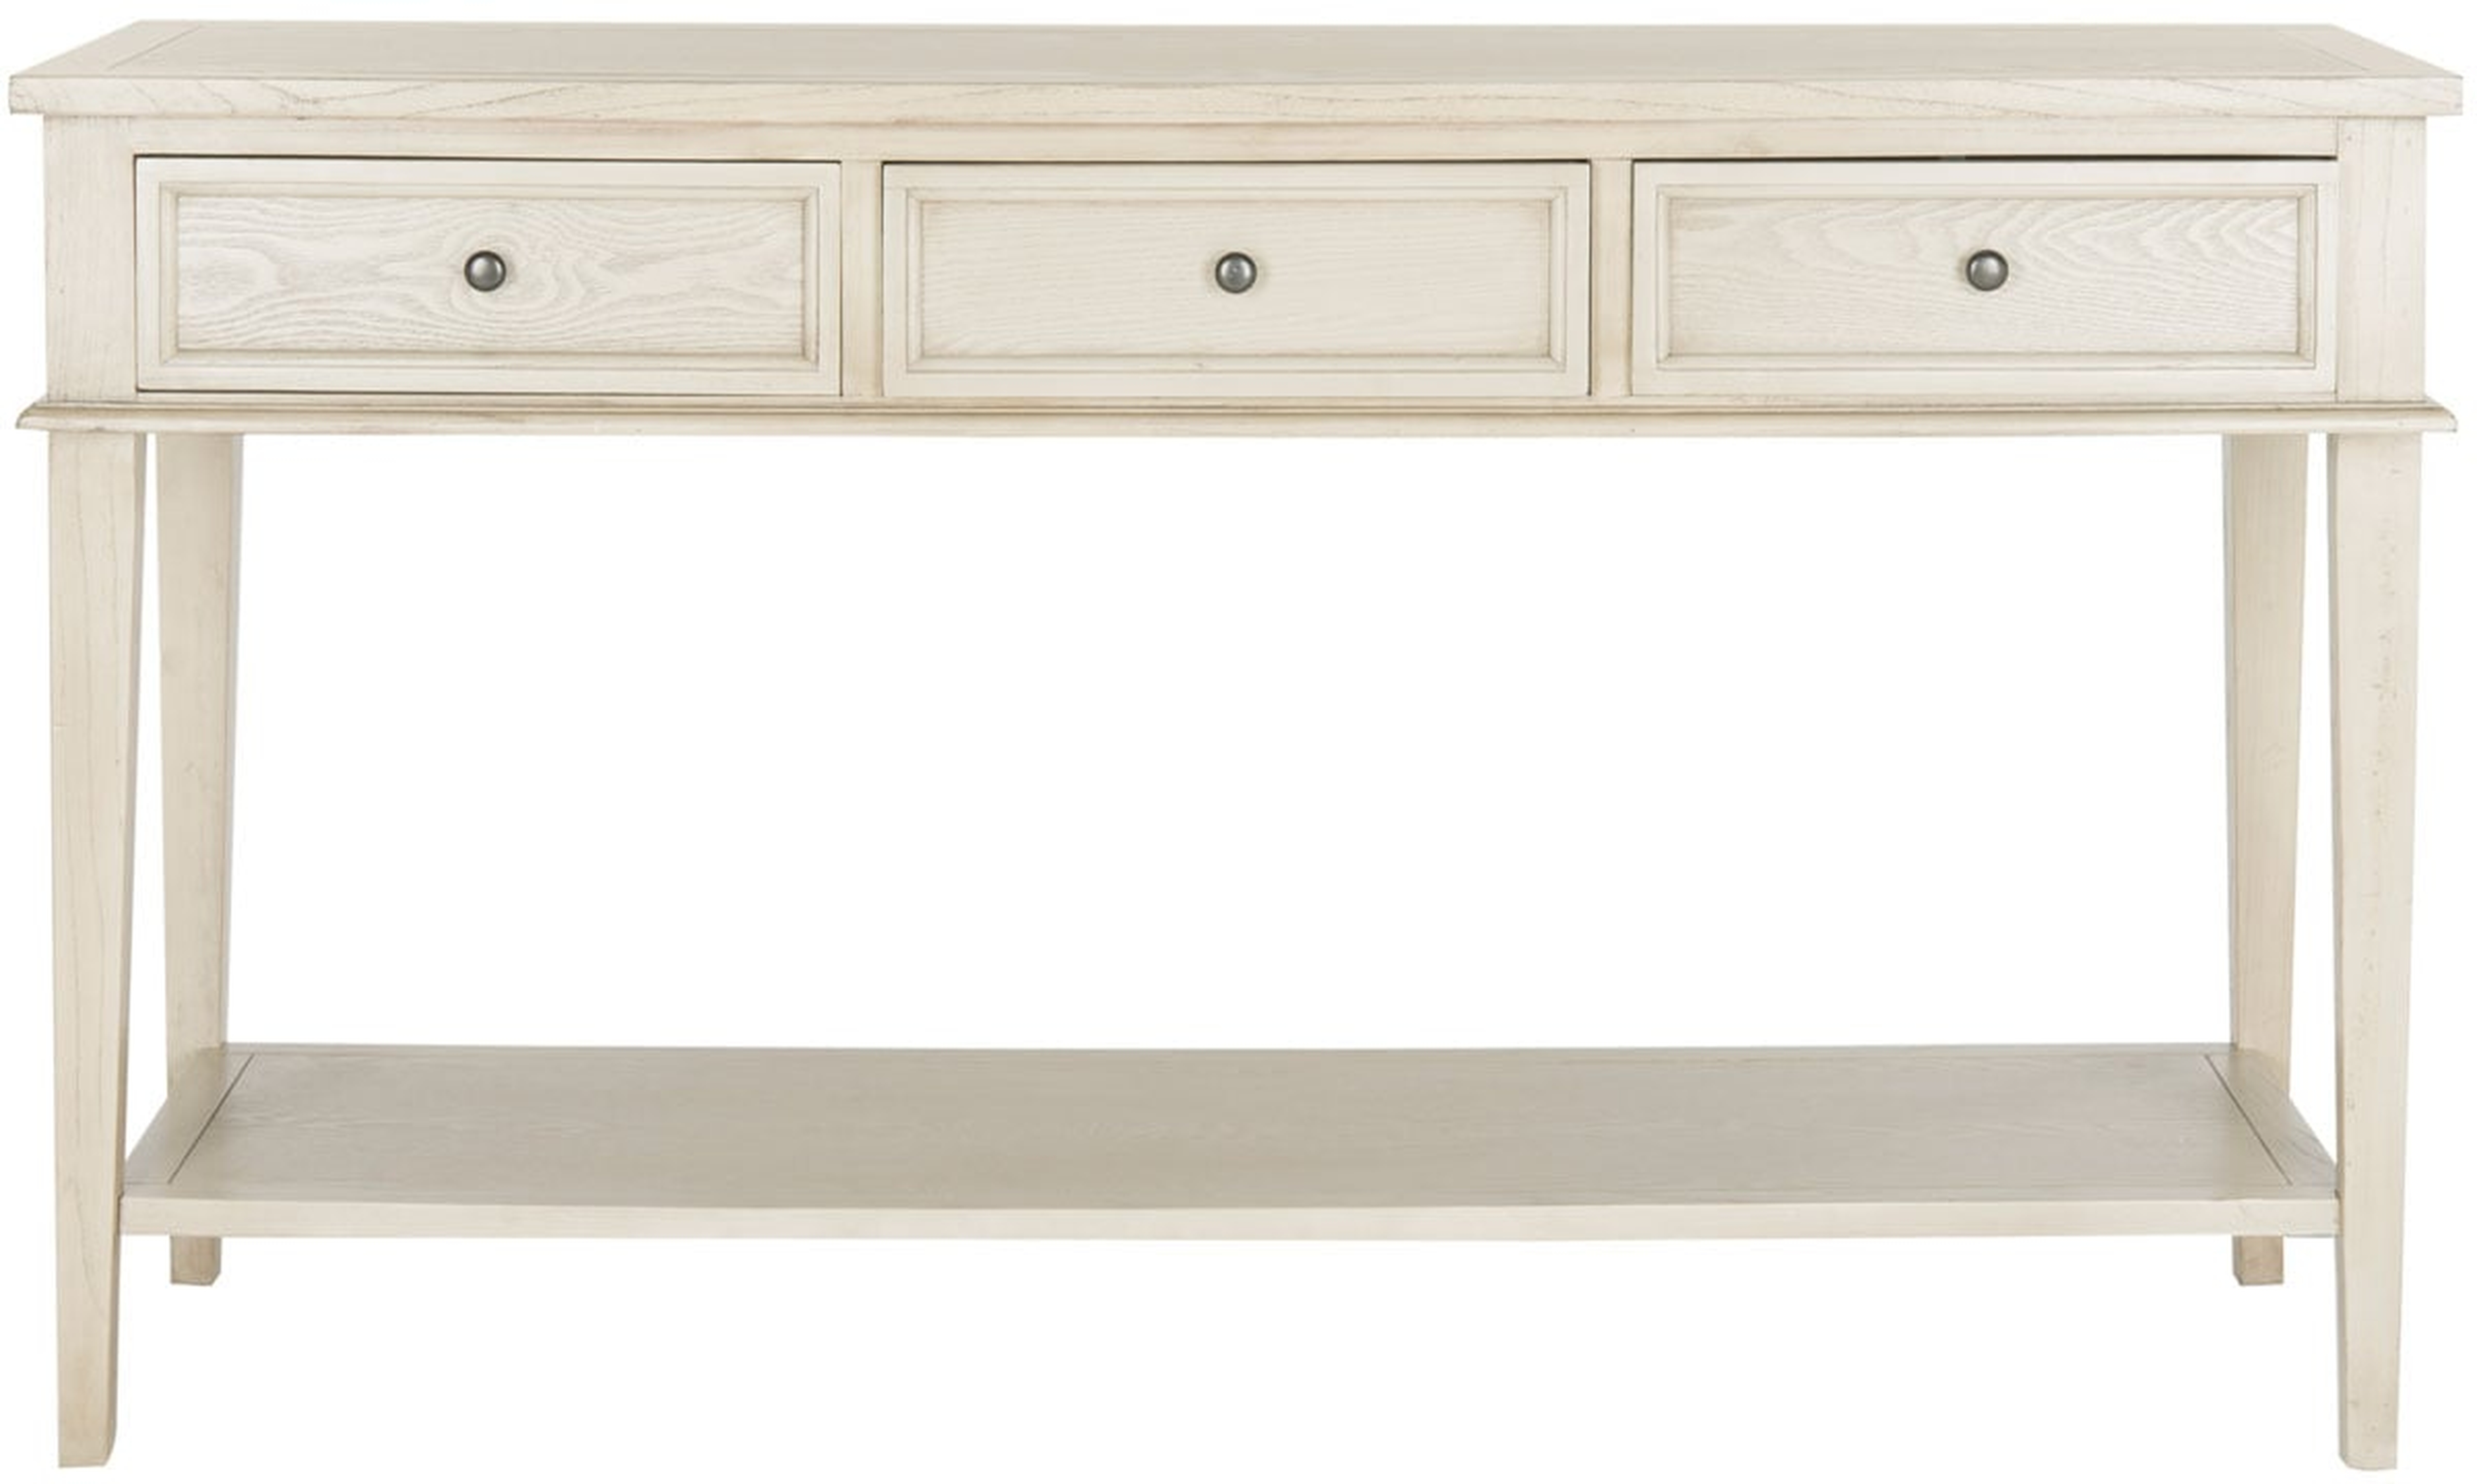 Manelin Console With Storage Drawers - White Wash - Arlo Home - Arlo Home